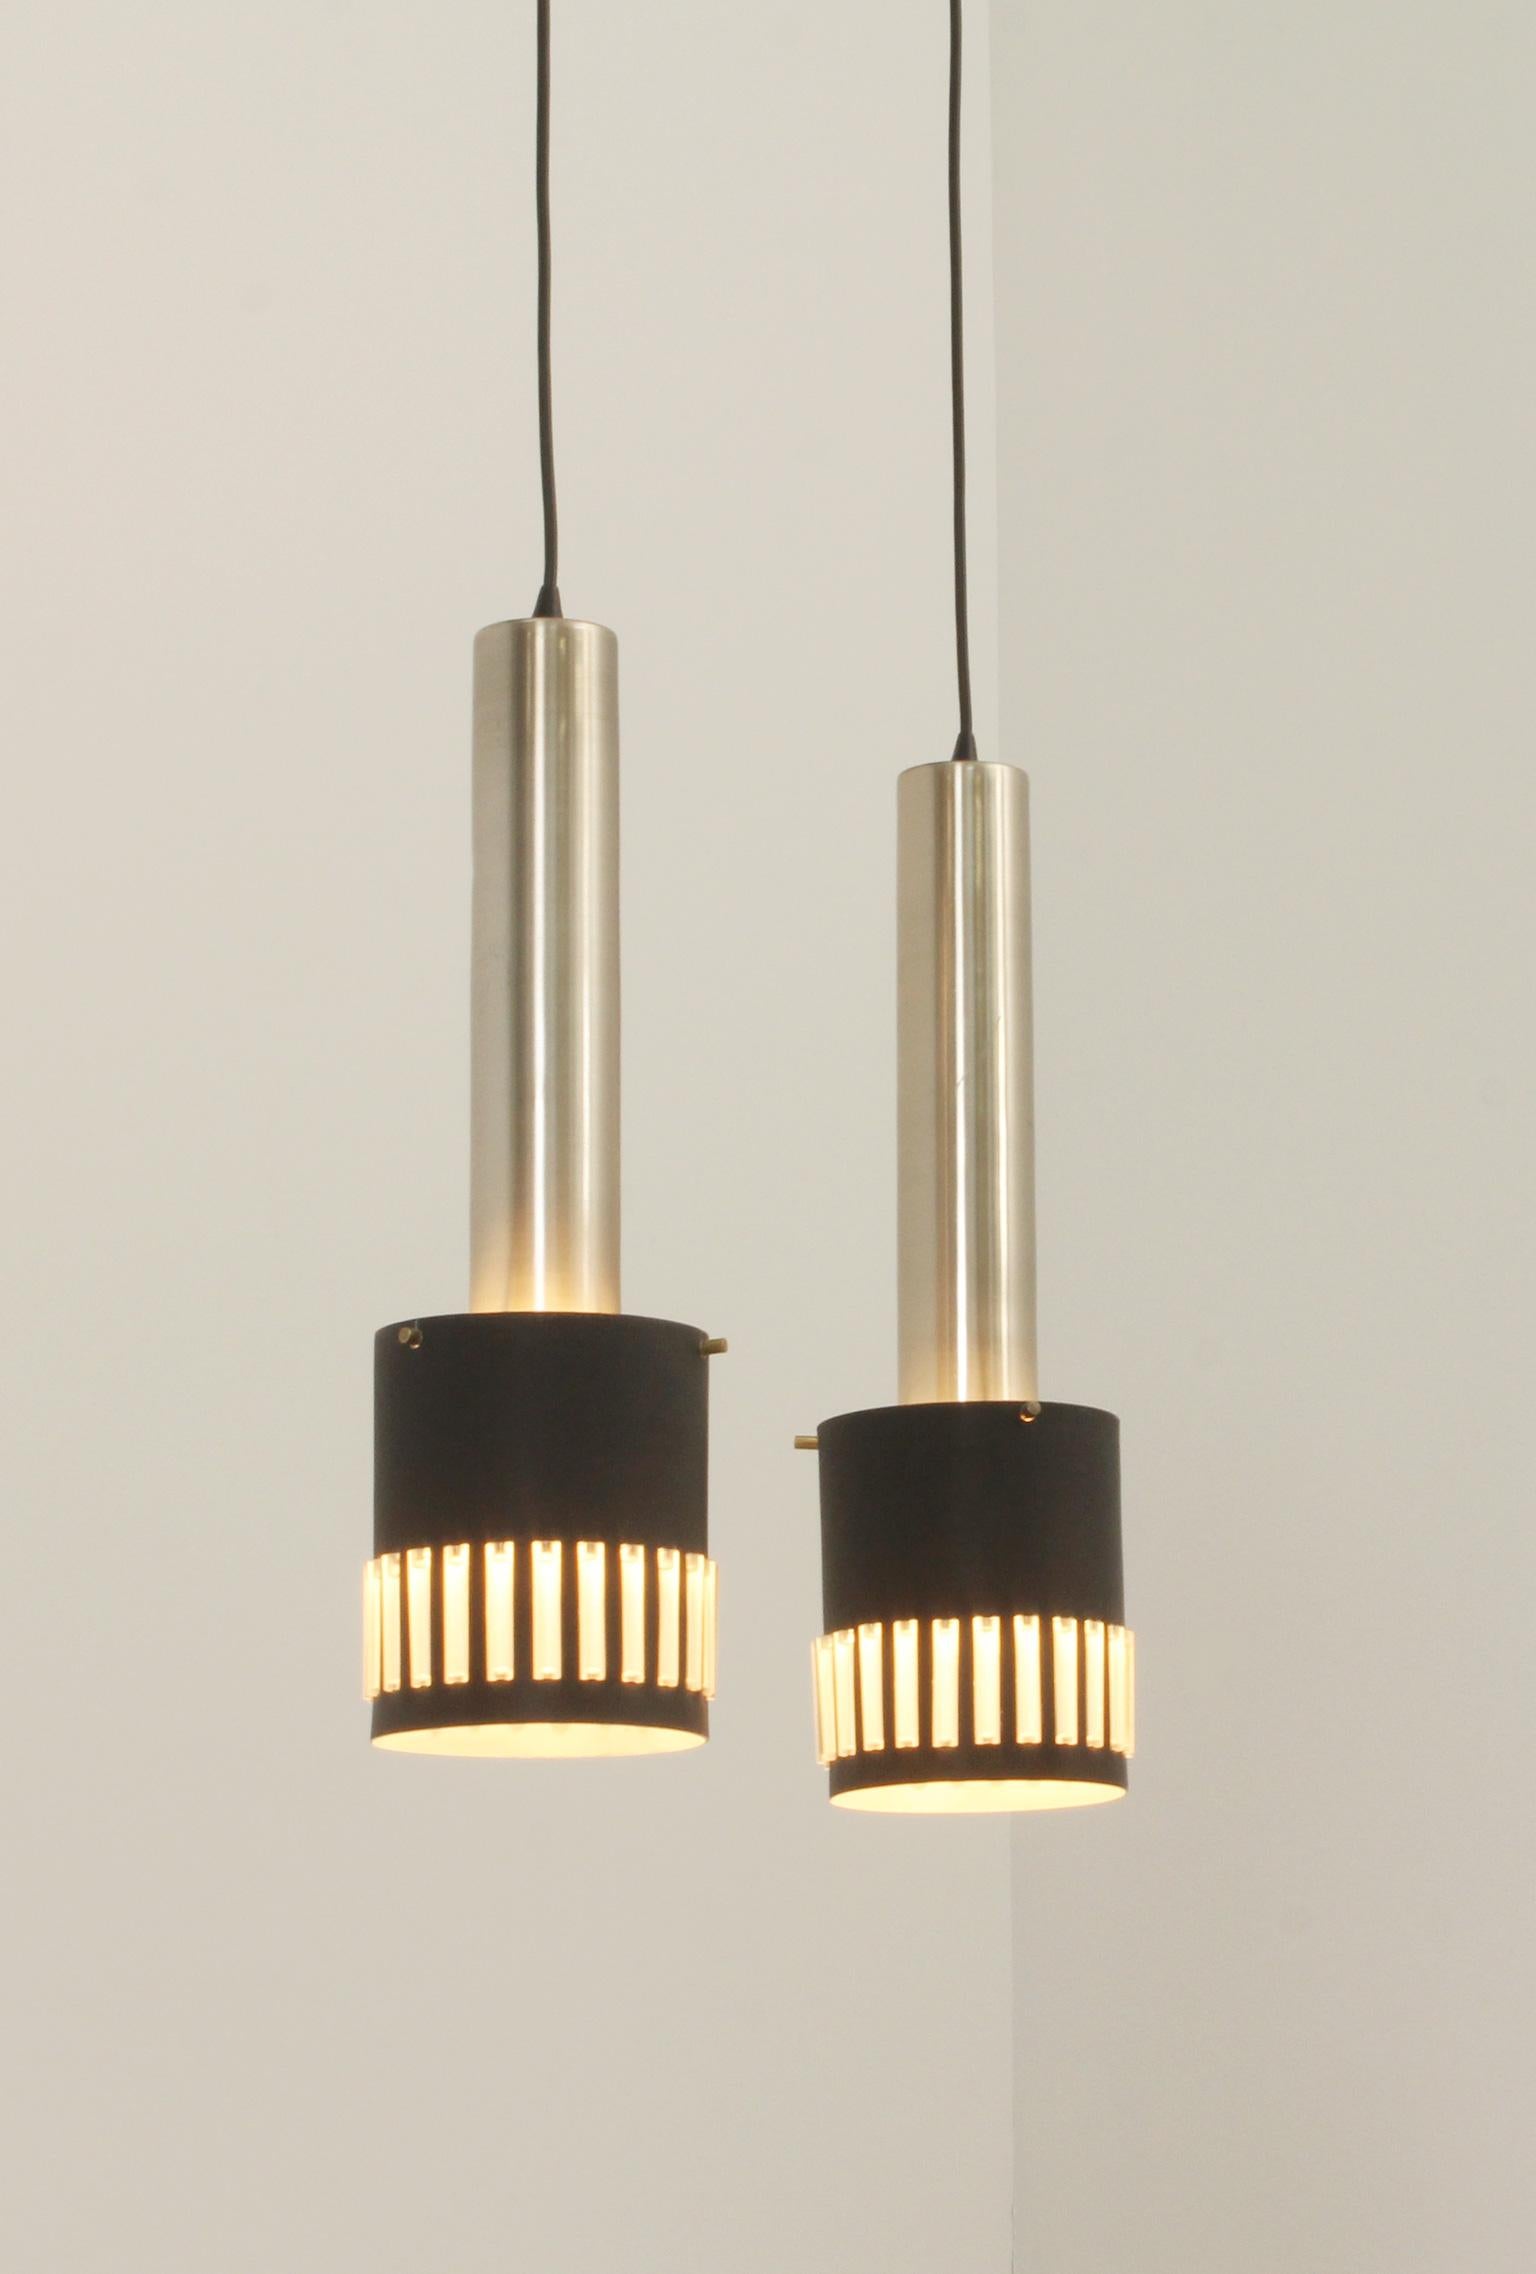 Pair of pendant lamps from 1960's, Spain. Aluminum, brass and lacquered metal with transparent acrylic inlays.